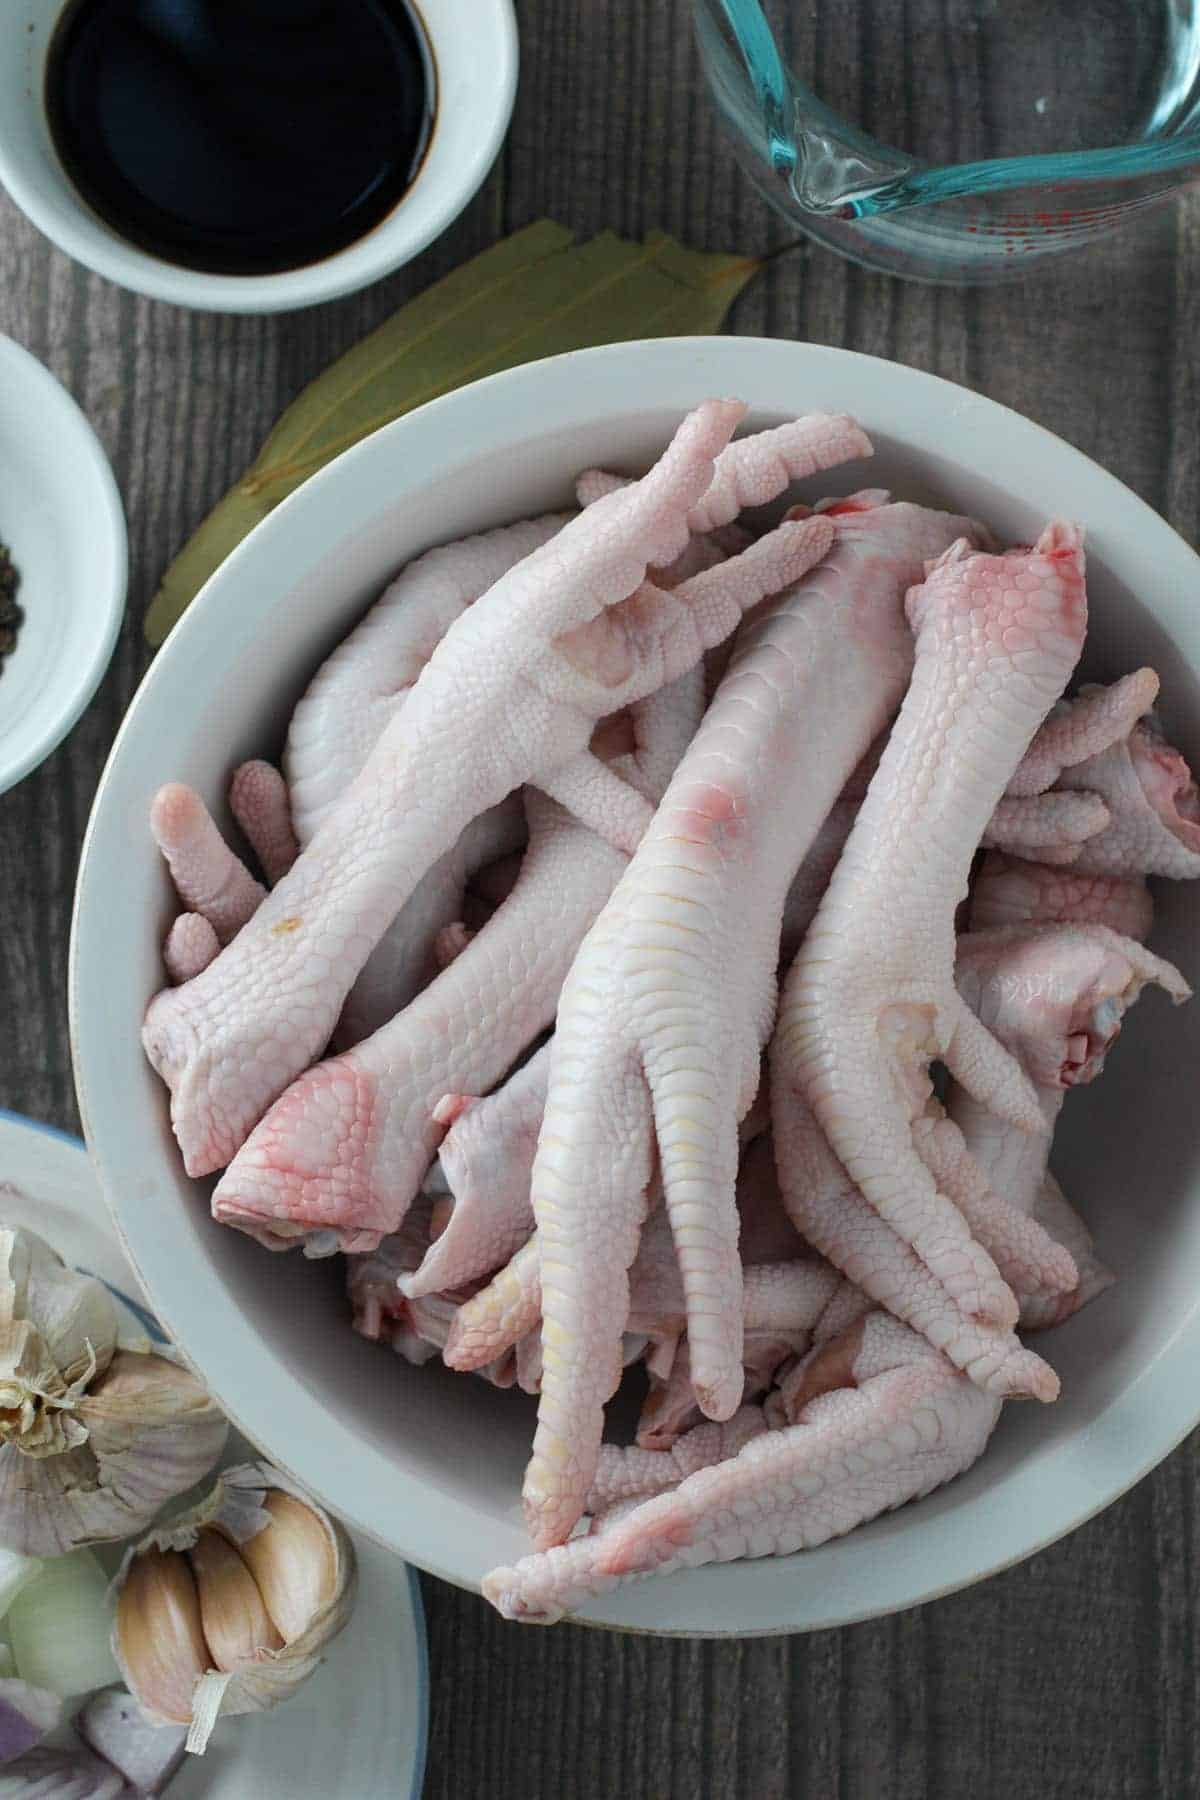 uncooked chicken feet in a bowl with bowls of soy sauce, garlic, and vinegar on the side